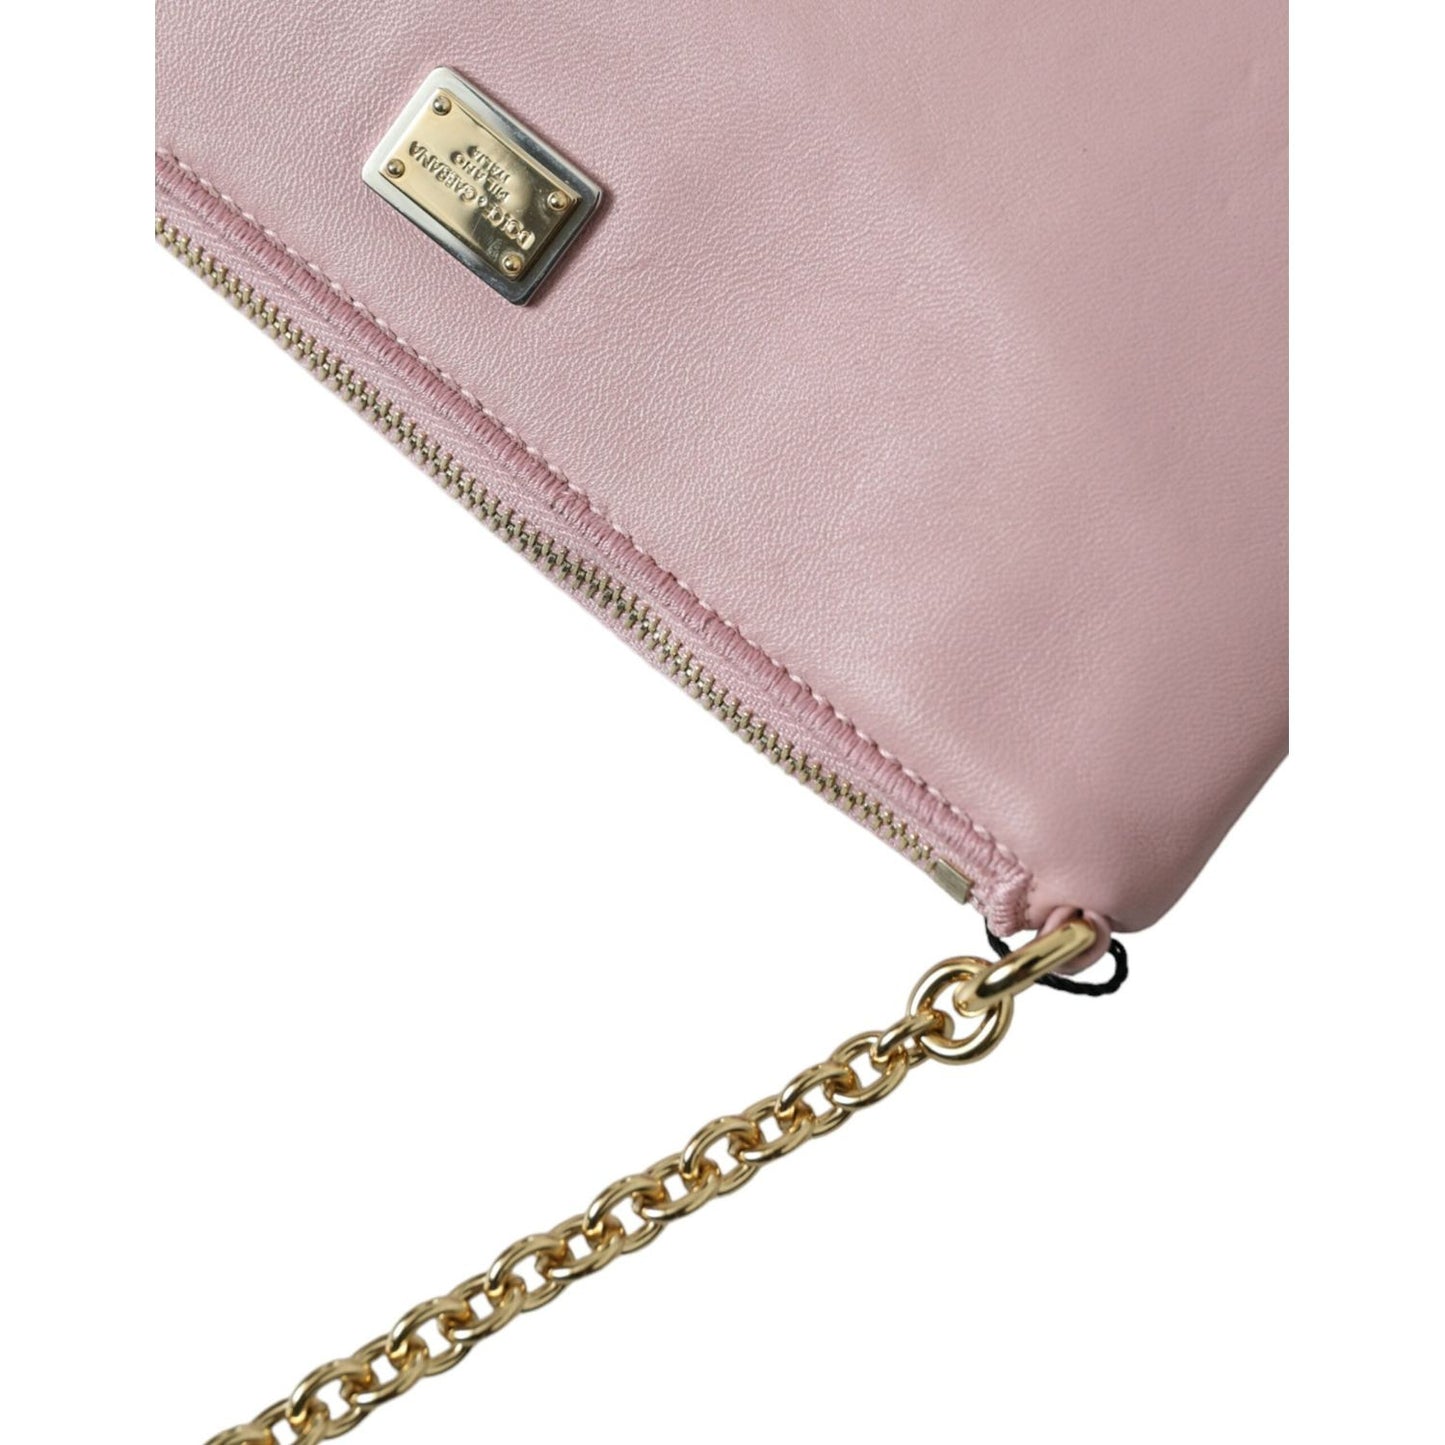 Dolce & Gabbana Elegant Pink Leather Pouch Clutch with Floral Embroidery elegant-pink-leather-pouch-clutch-with-floral-embroidery